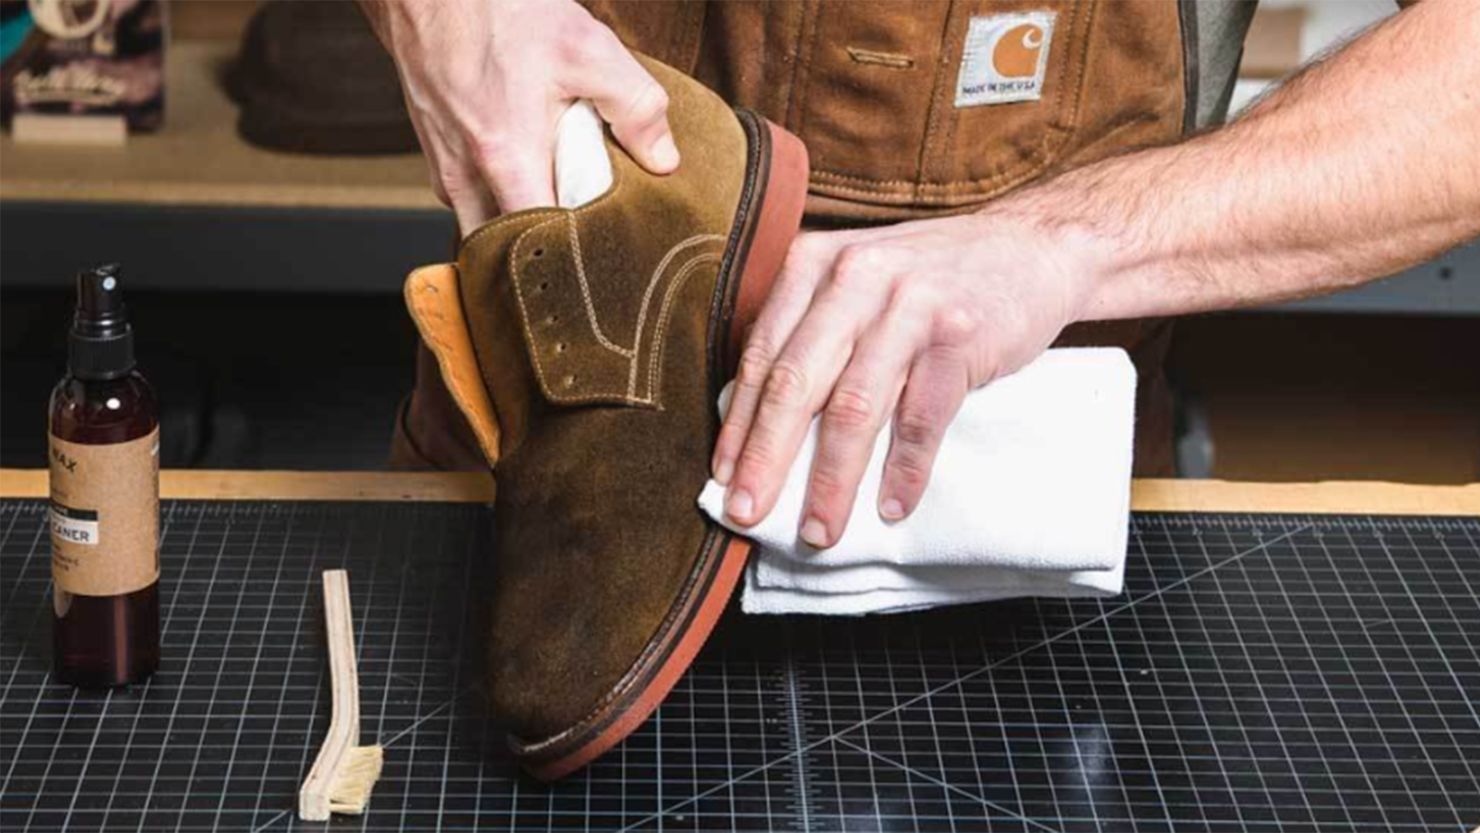 The Right Way to Keep Your Suede Shoes Clean